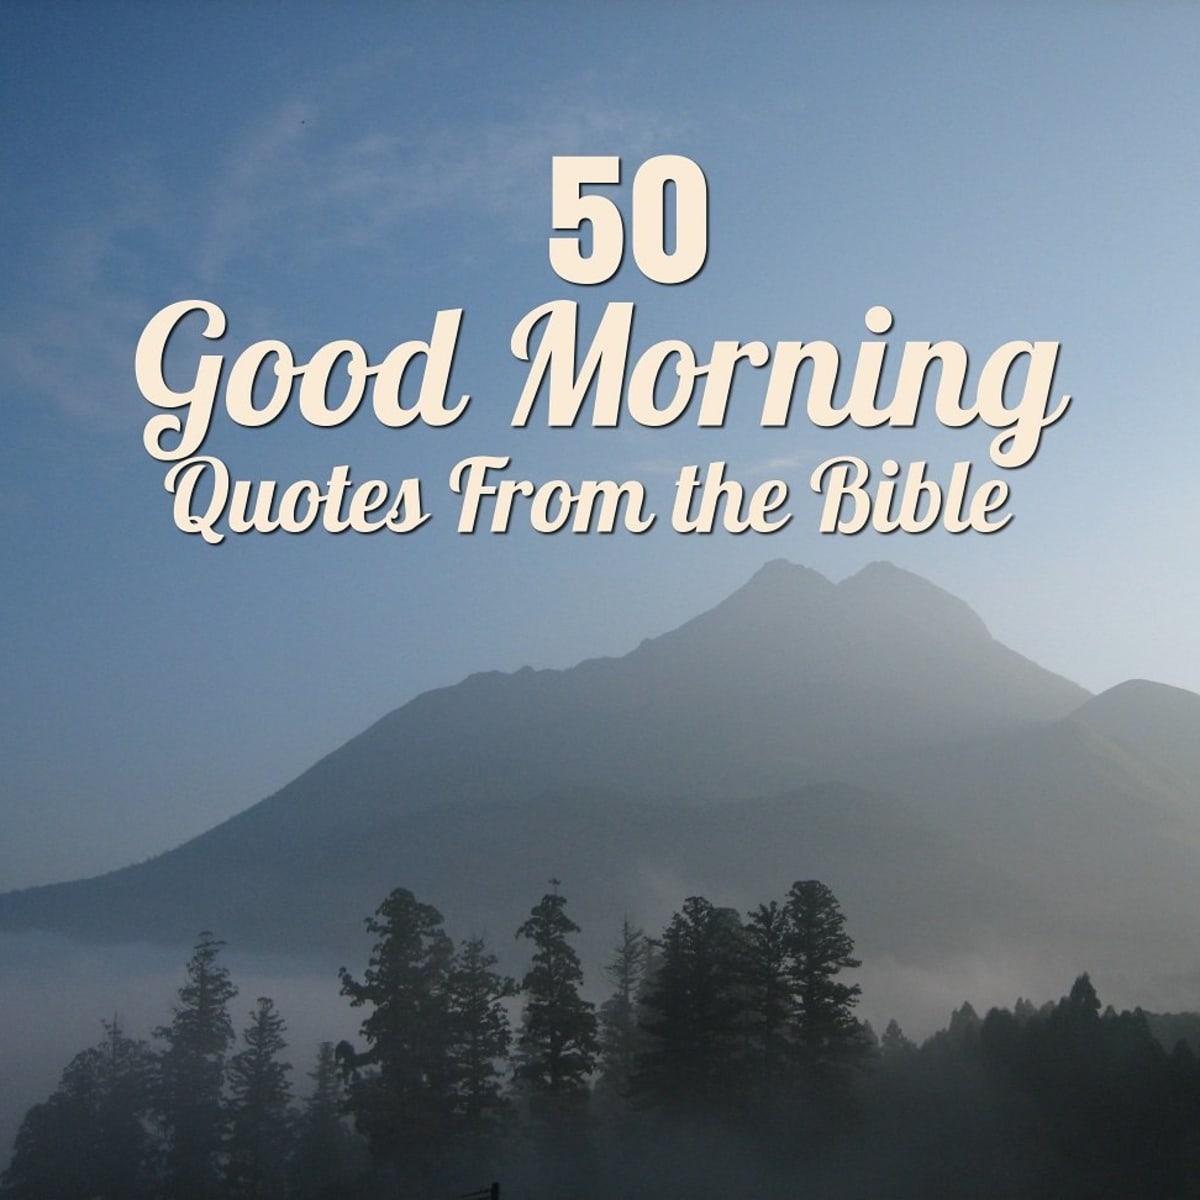 50 Good Morning Quotes from the Bible - LetterPile